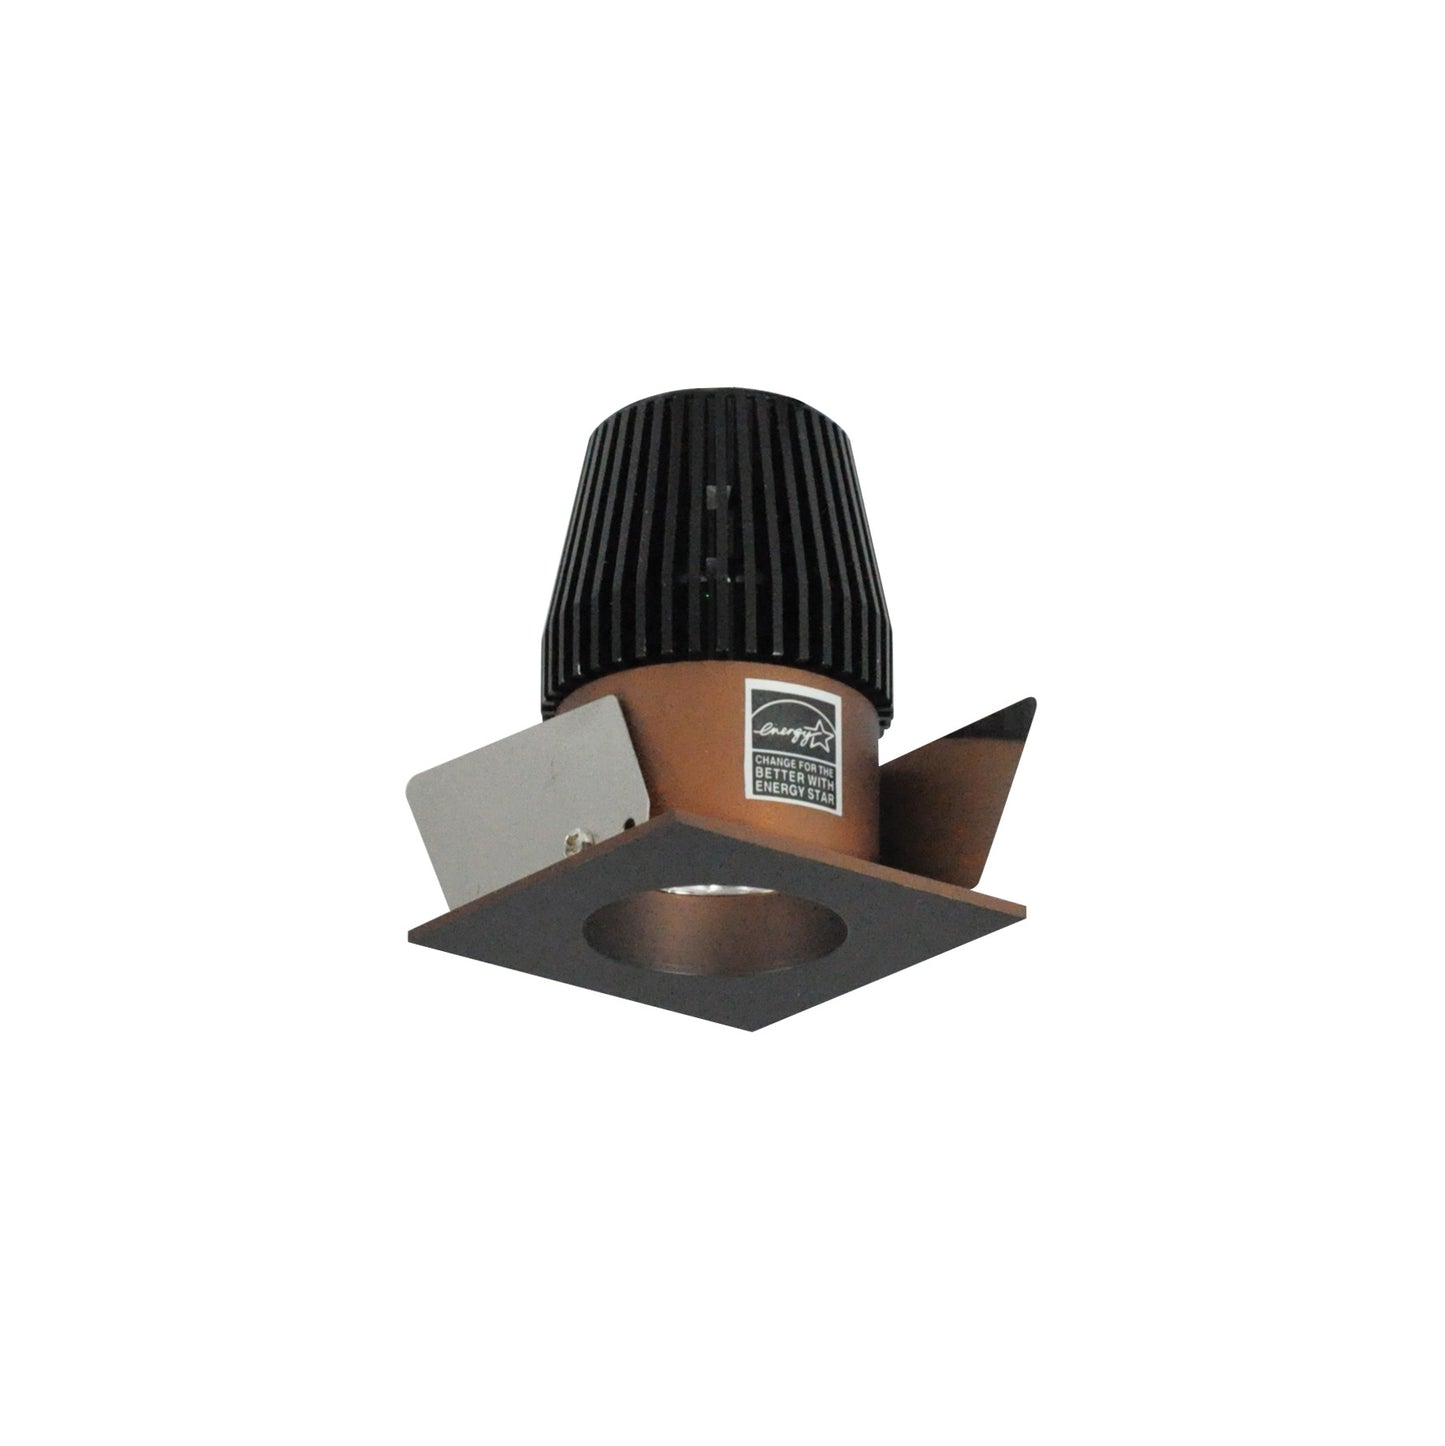 Nora Lighting 1" Iolite LED NTF Square Reflector with Round Aperture, 600lm, 3500K, Bronze Reflector / Bronze Flange NIO-1SNG35XBZ